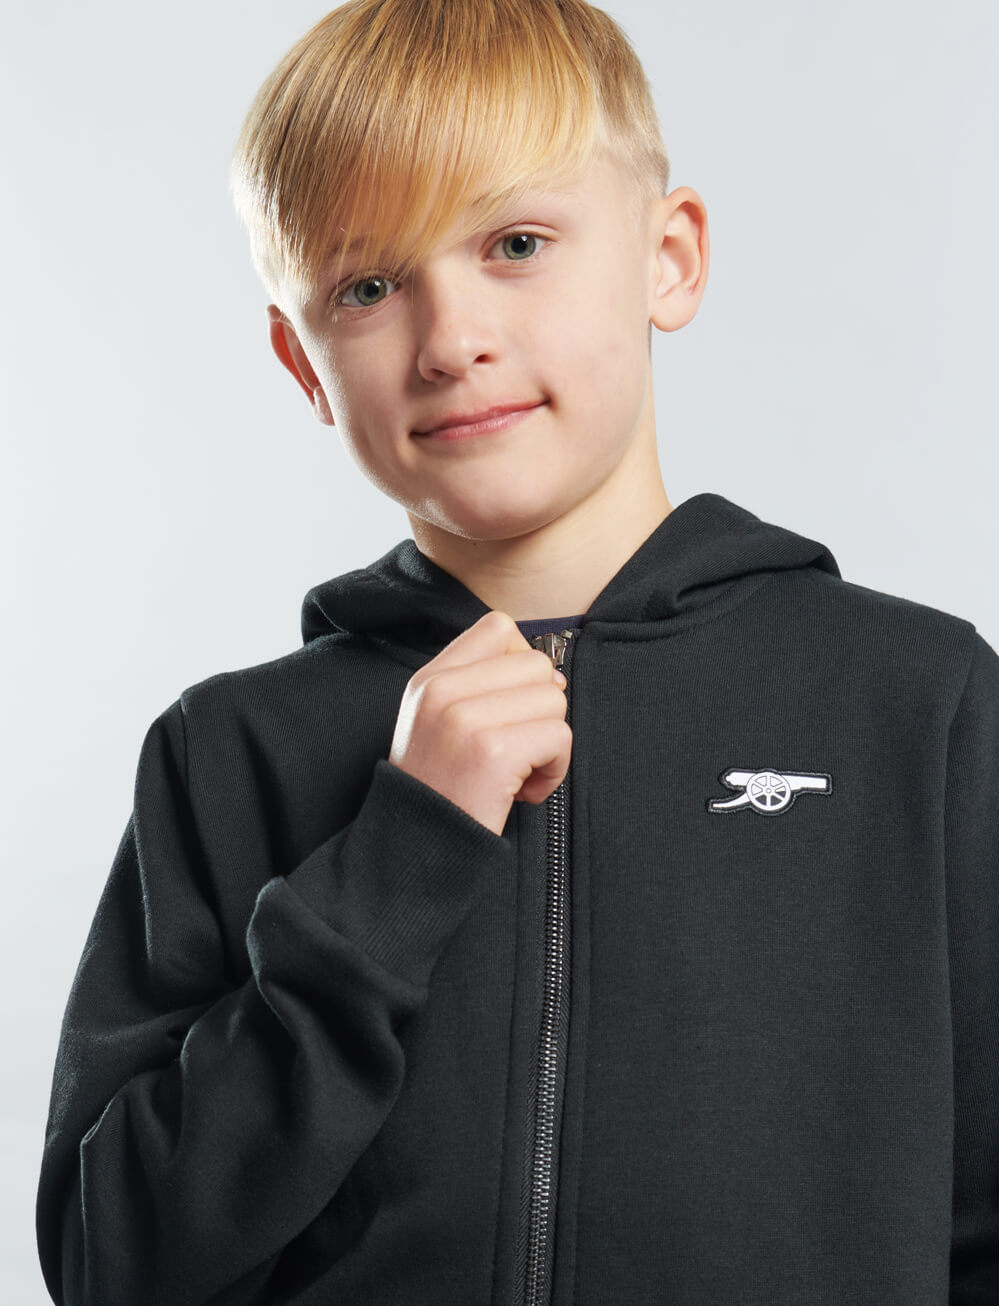 Official Arsenal Kids Full Zip Hoodie - Black - The World Football Store